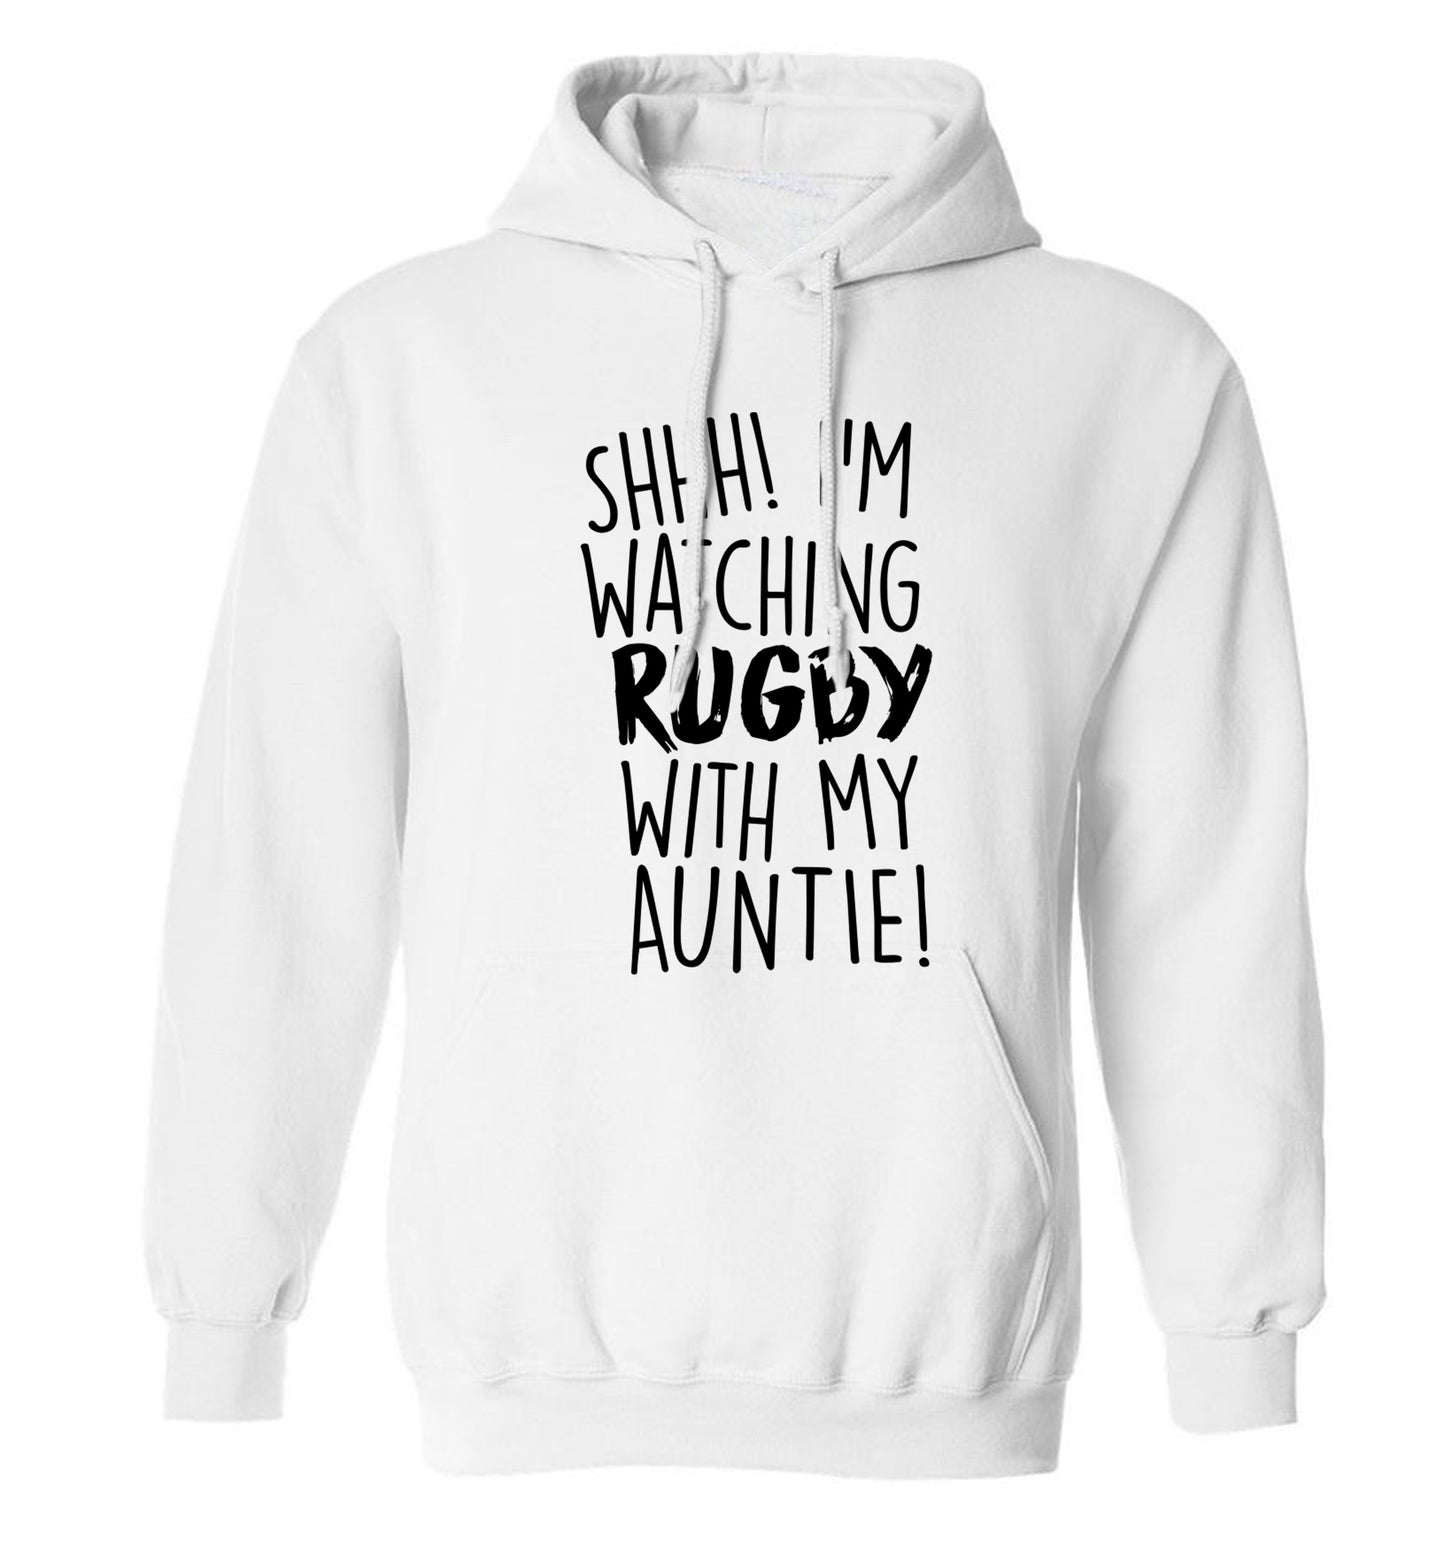 Shhh I'm watchin rugby with my auntie adults unisex white hoodie 2XL